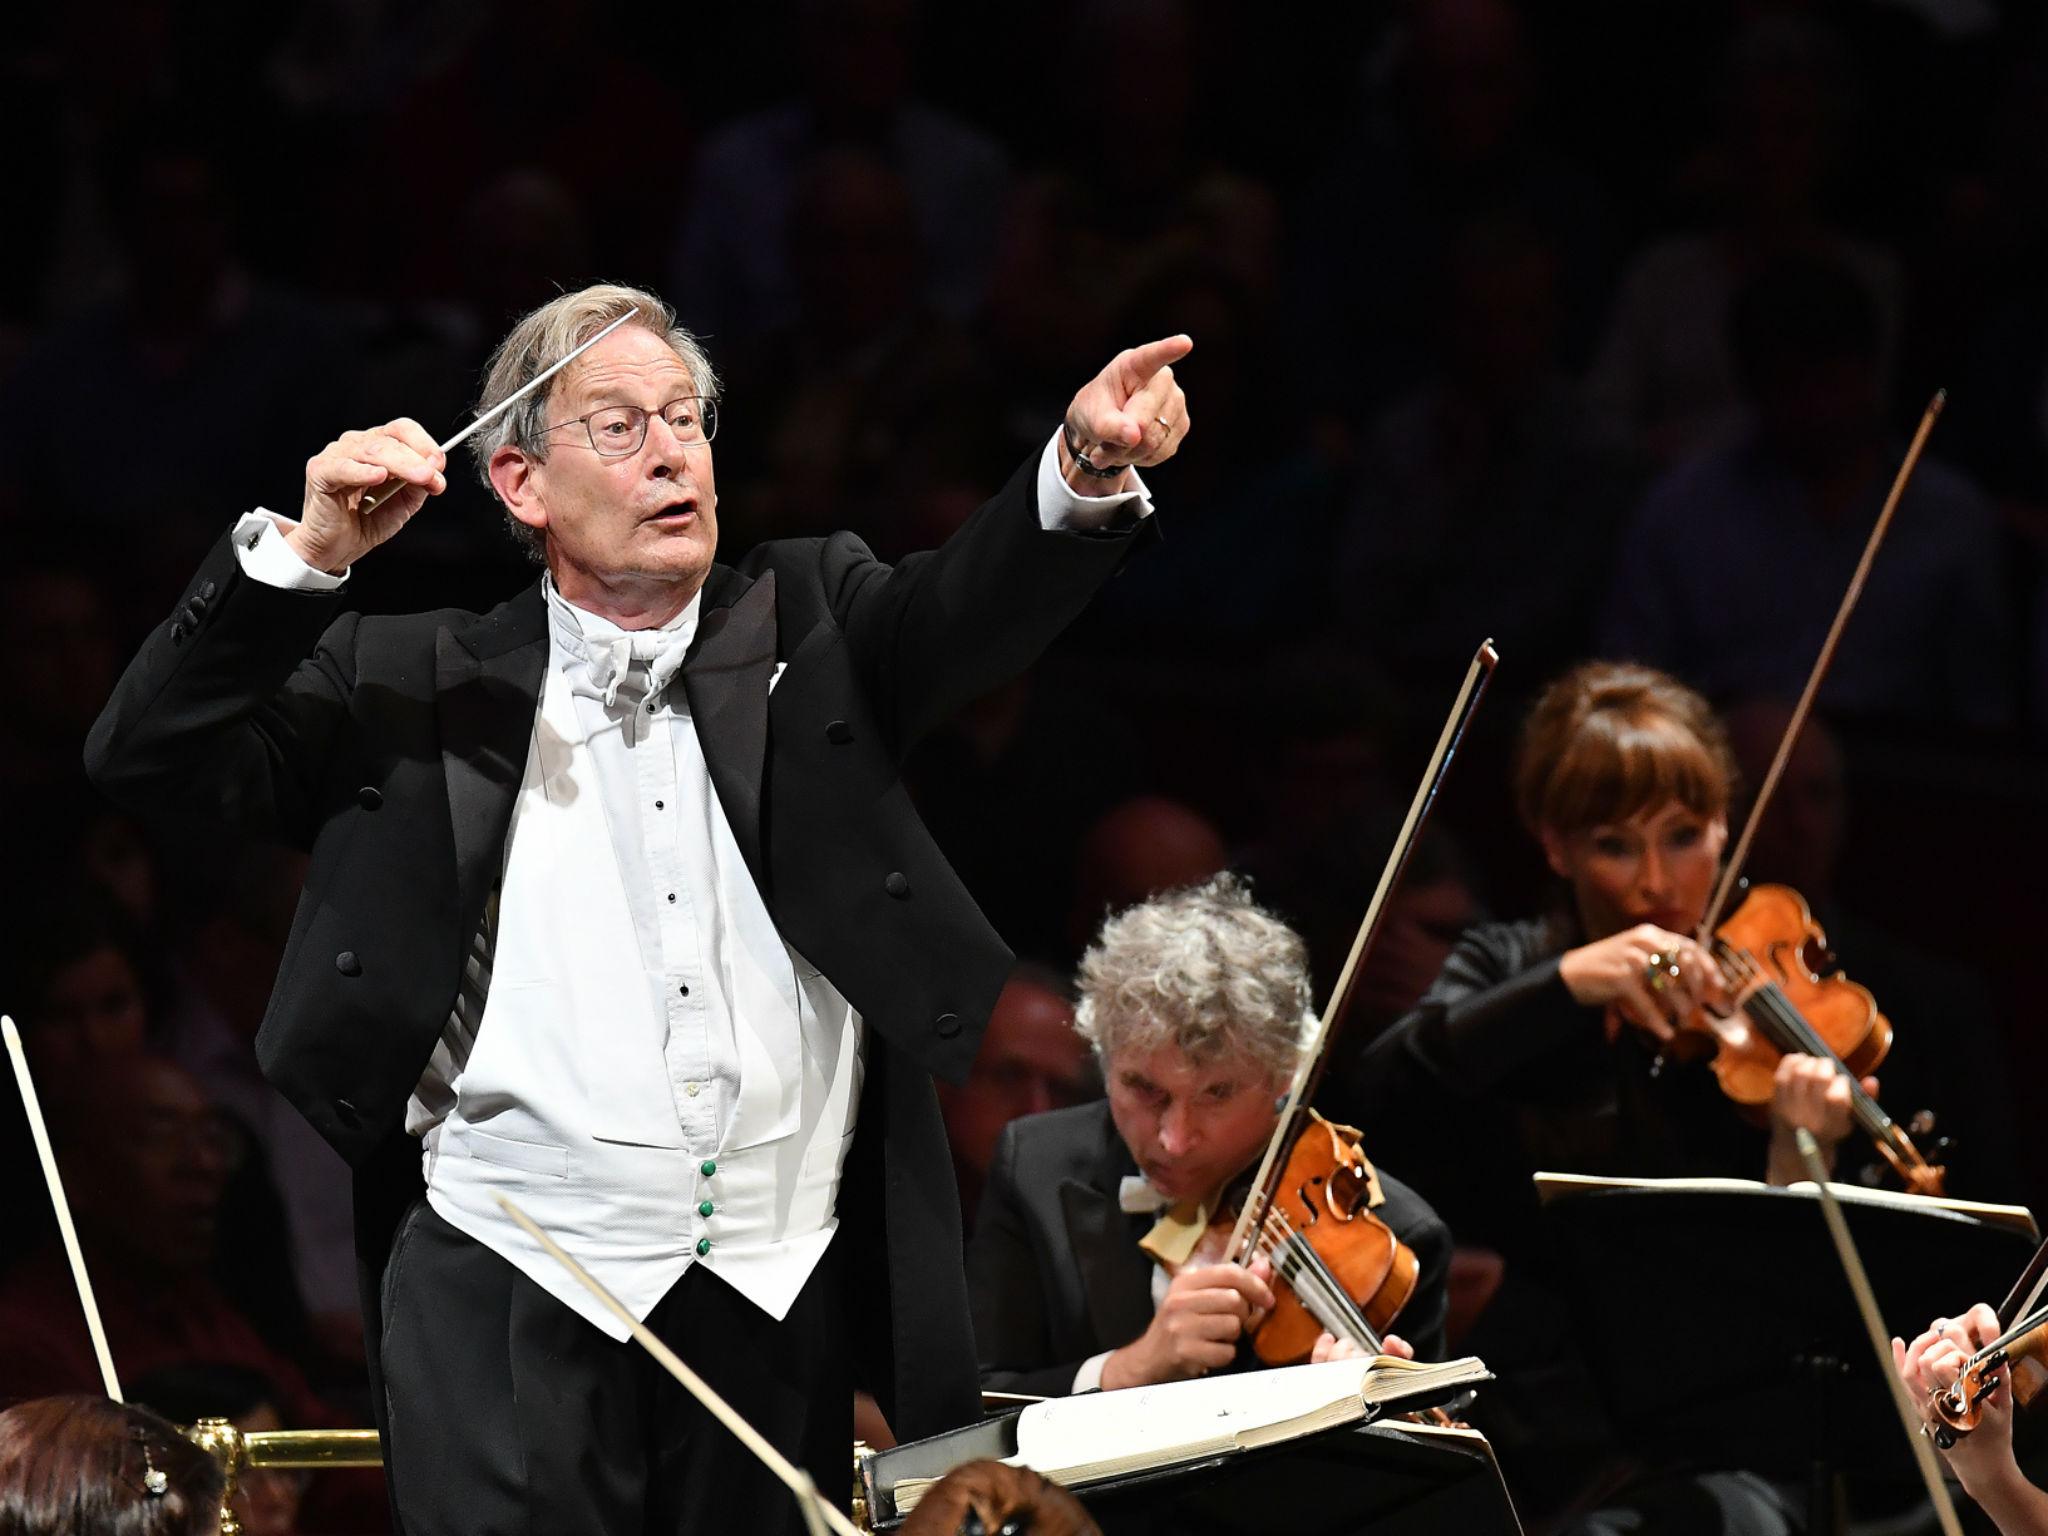 Sir John Eliot Gardiner conducts the Orchestre Révolutionnaire et Romantique, Monteverdi Choir, Trinity Boys Choir, National Youth Choir of Scotland, in a performance of Berlioz’s The Damnation of Faust at the BBC Proms